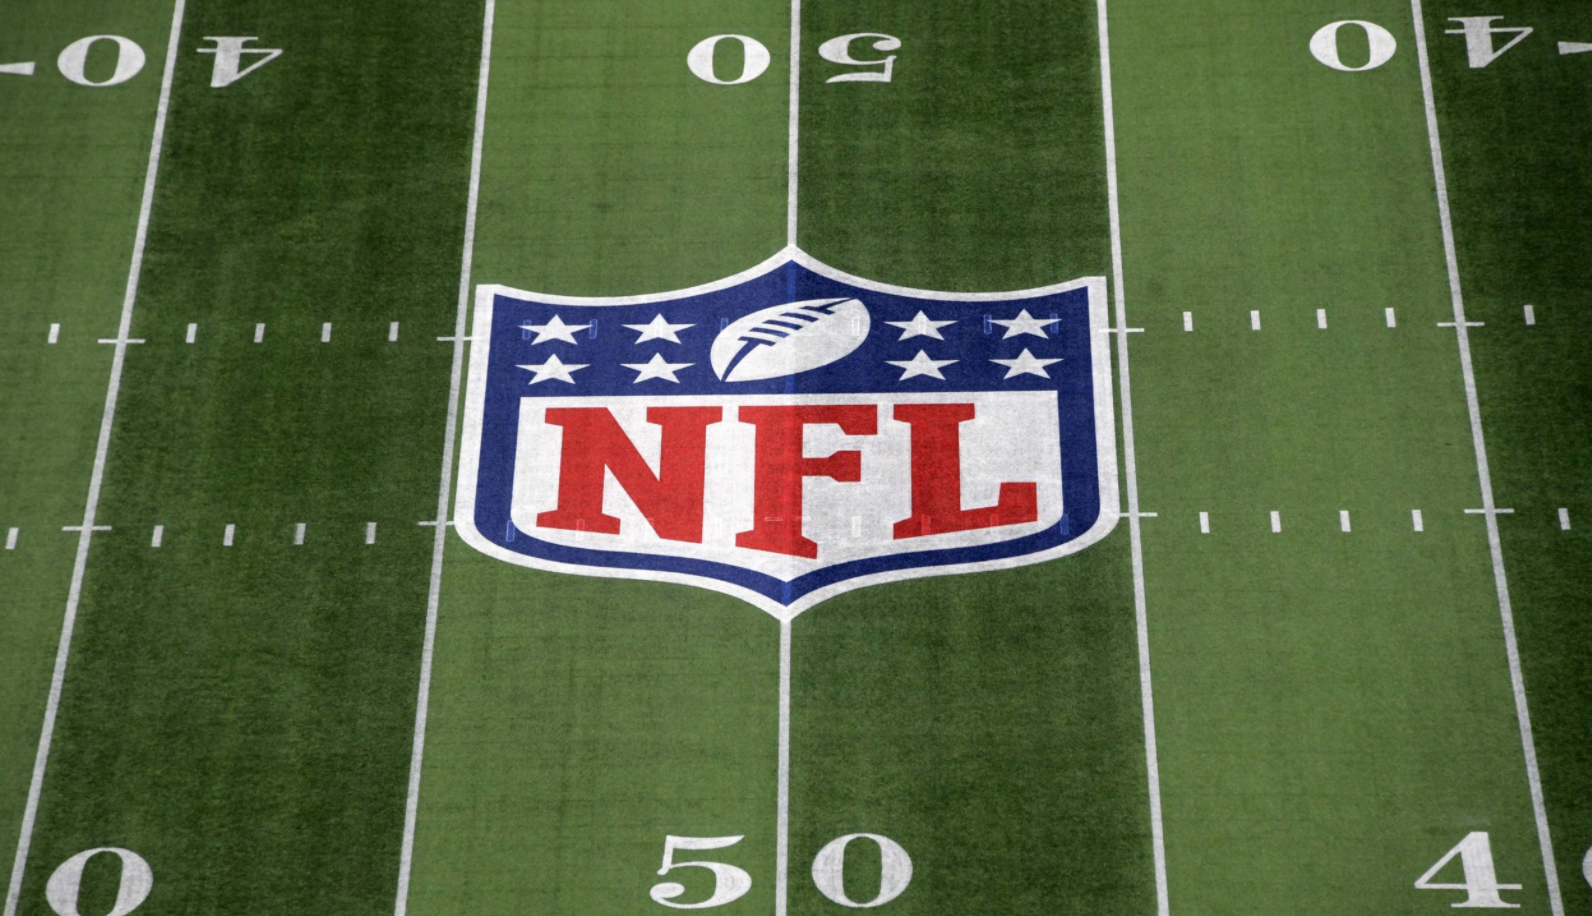 Will You Watch the NFL's Season Opener? Daily Opinion Polls